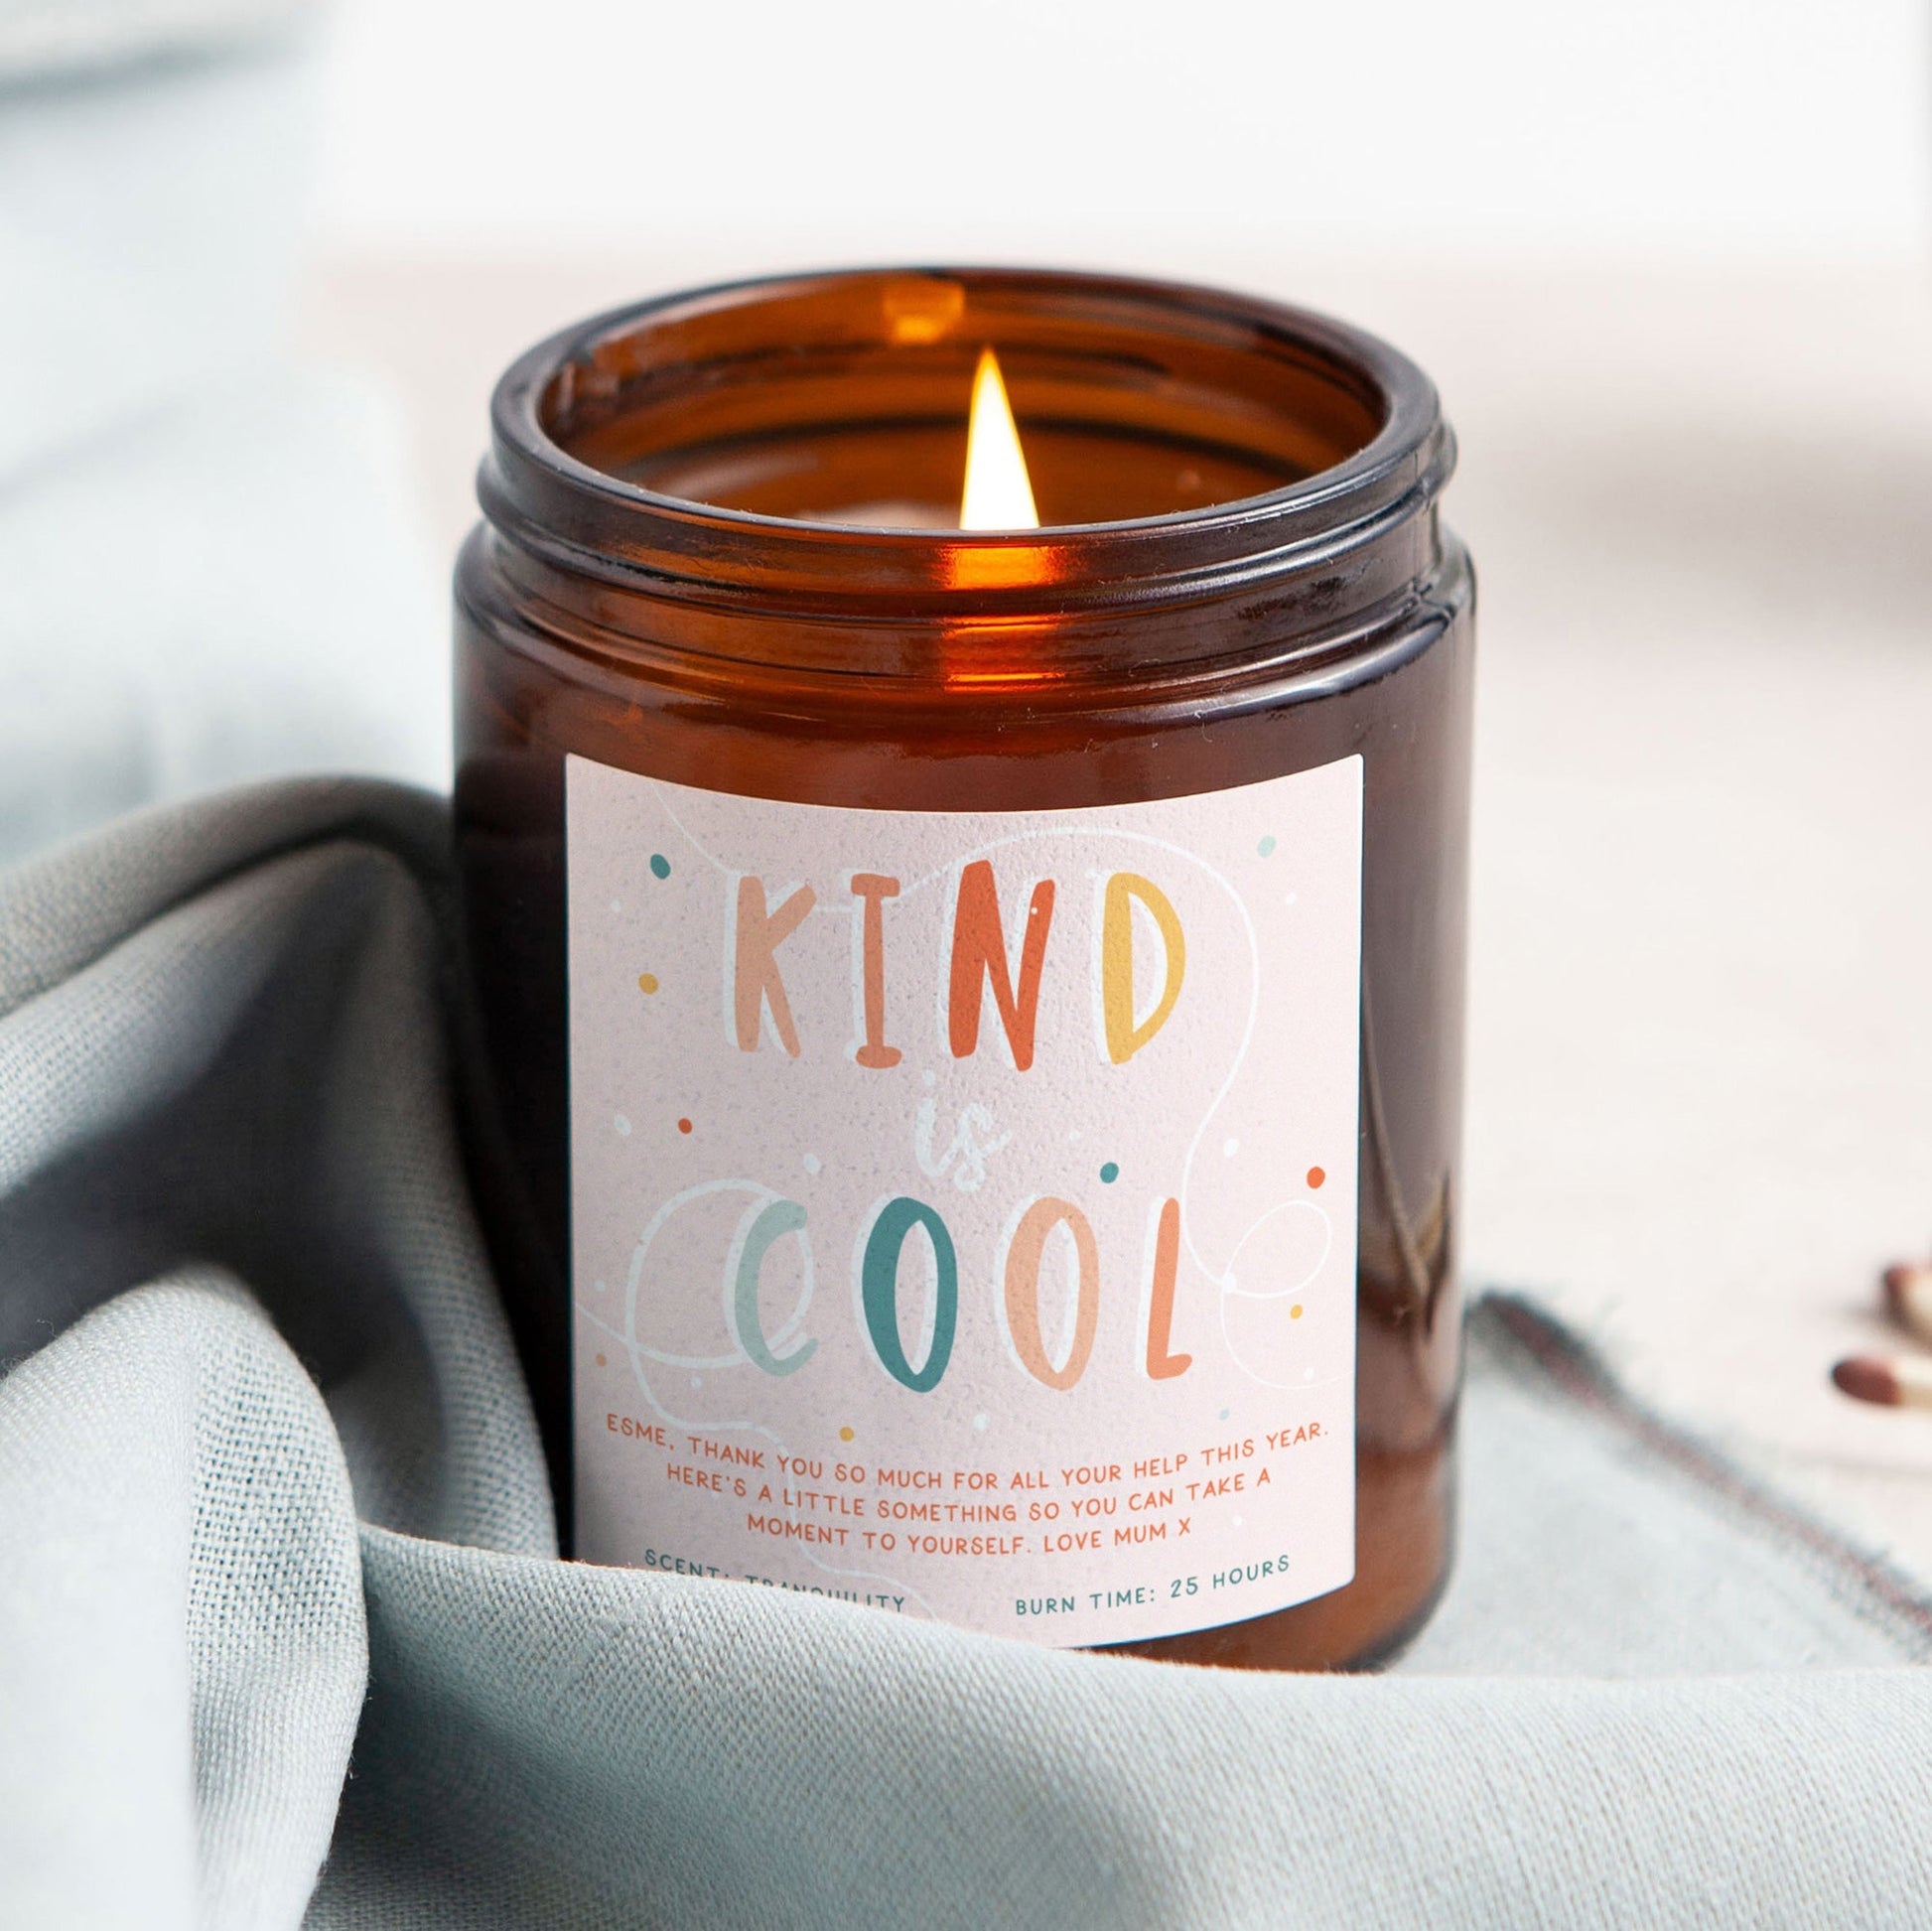 Thank You Gift Candle Kind is Cool - Kindred Fires